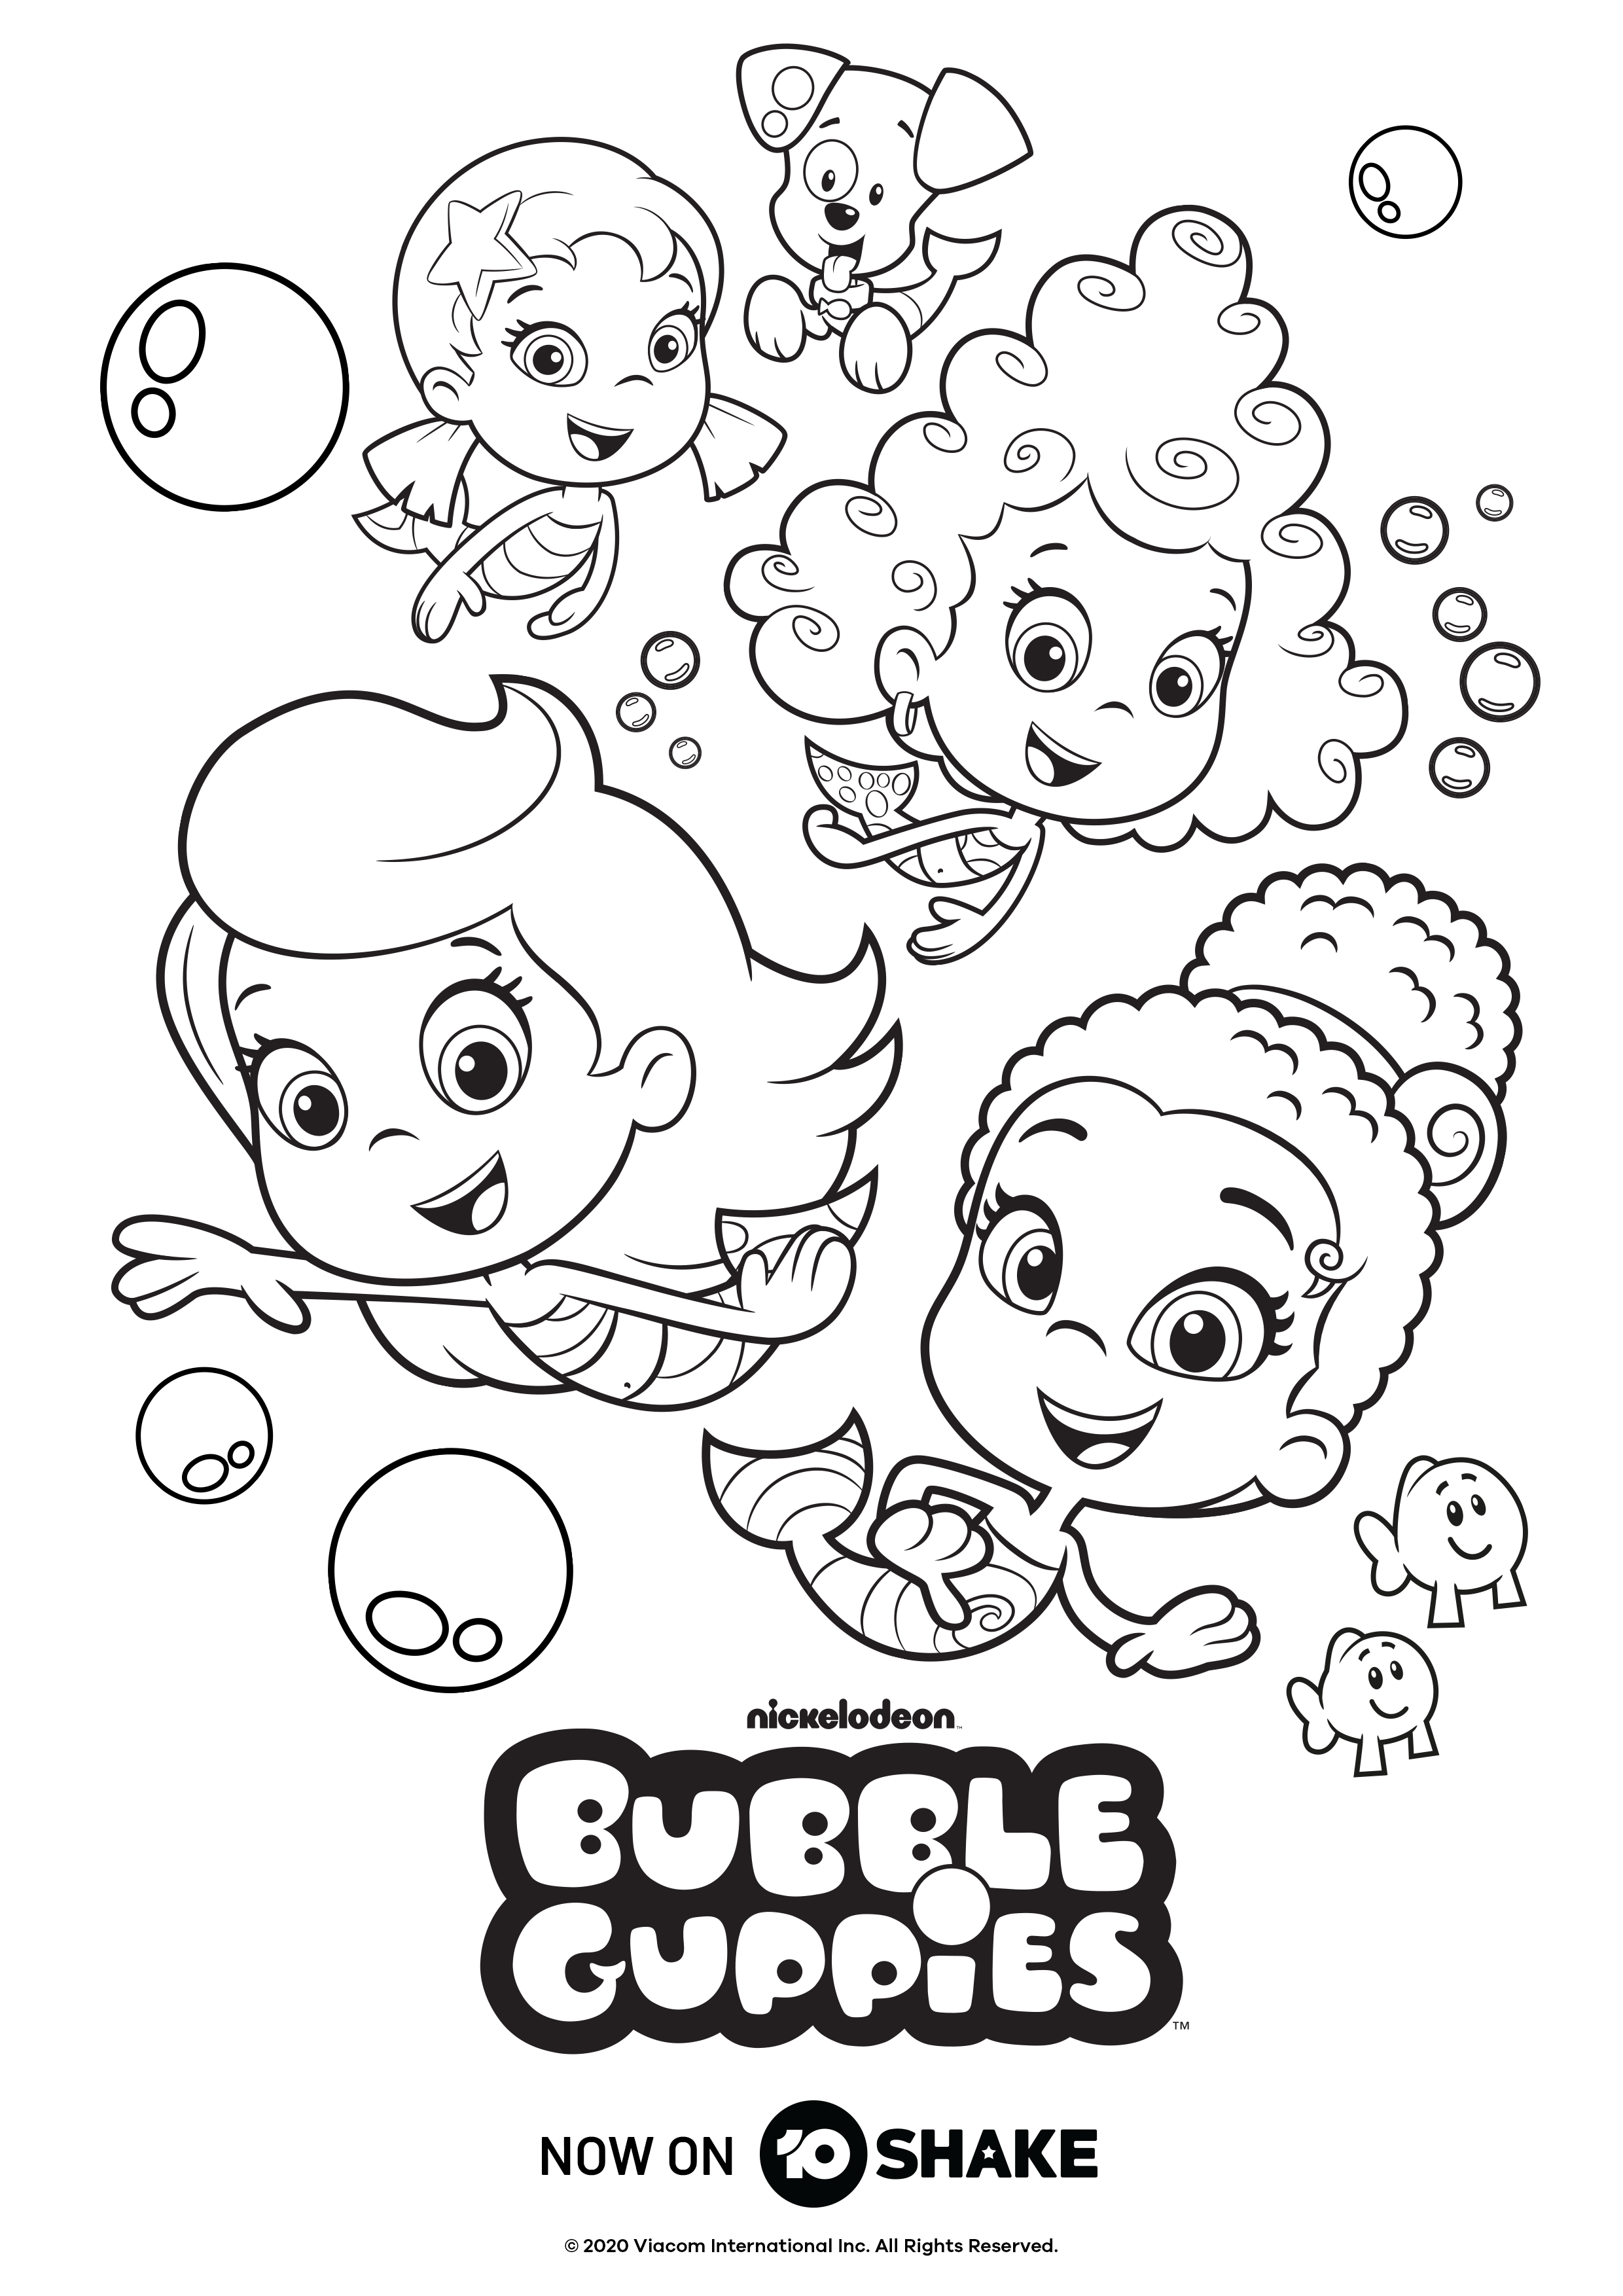 10 Shake Colouring In Pages - Network Ten